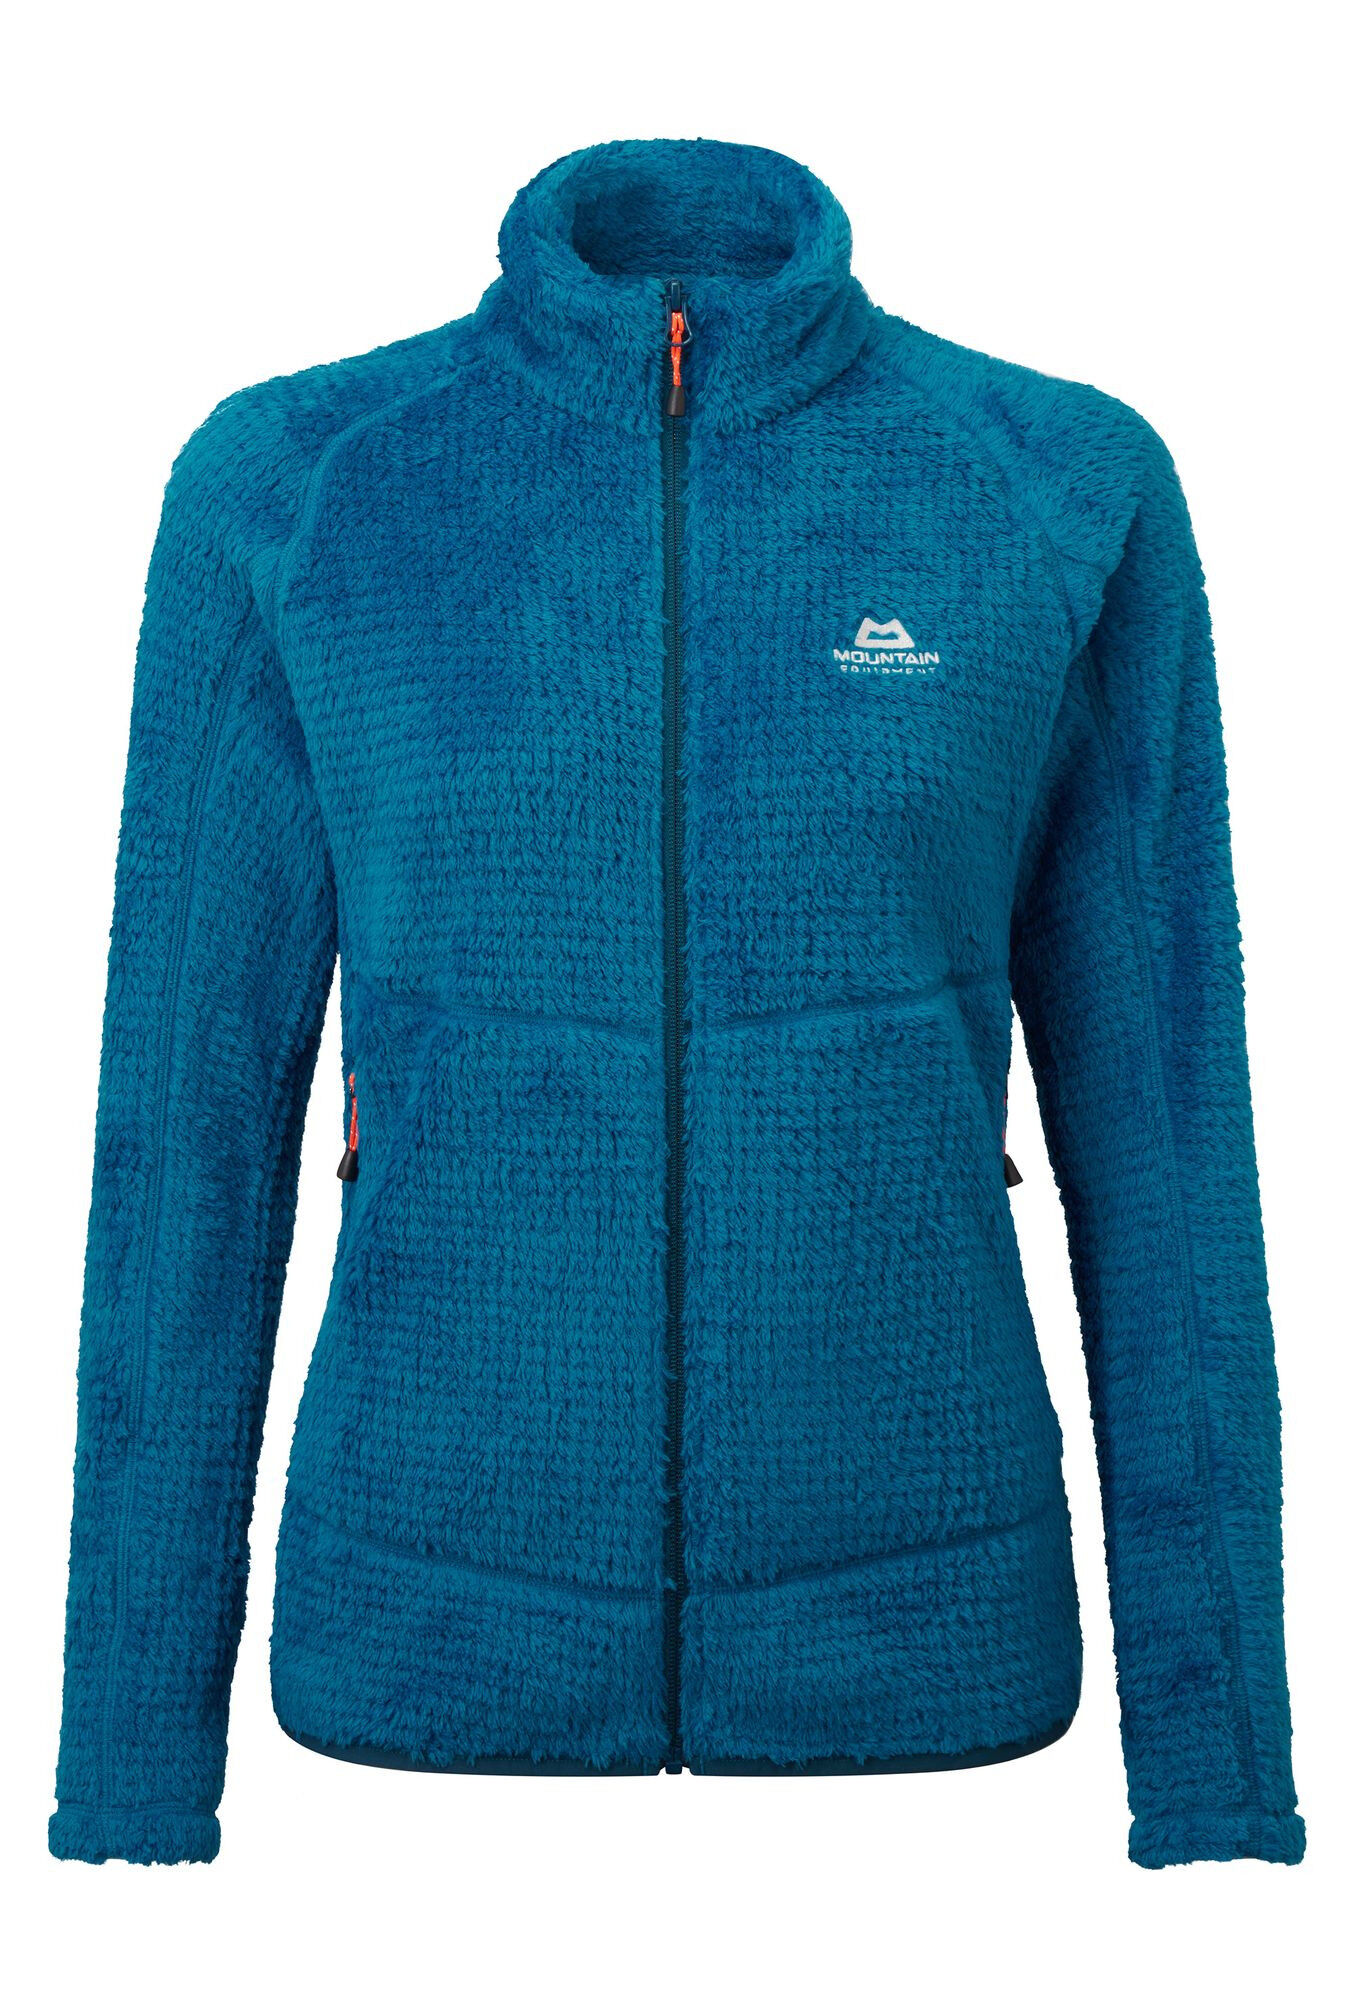 Mountain Equipment Hispar Jacket - Giacca in pile - Donna